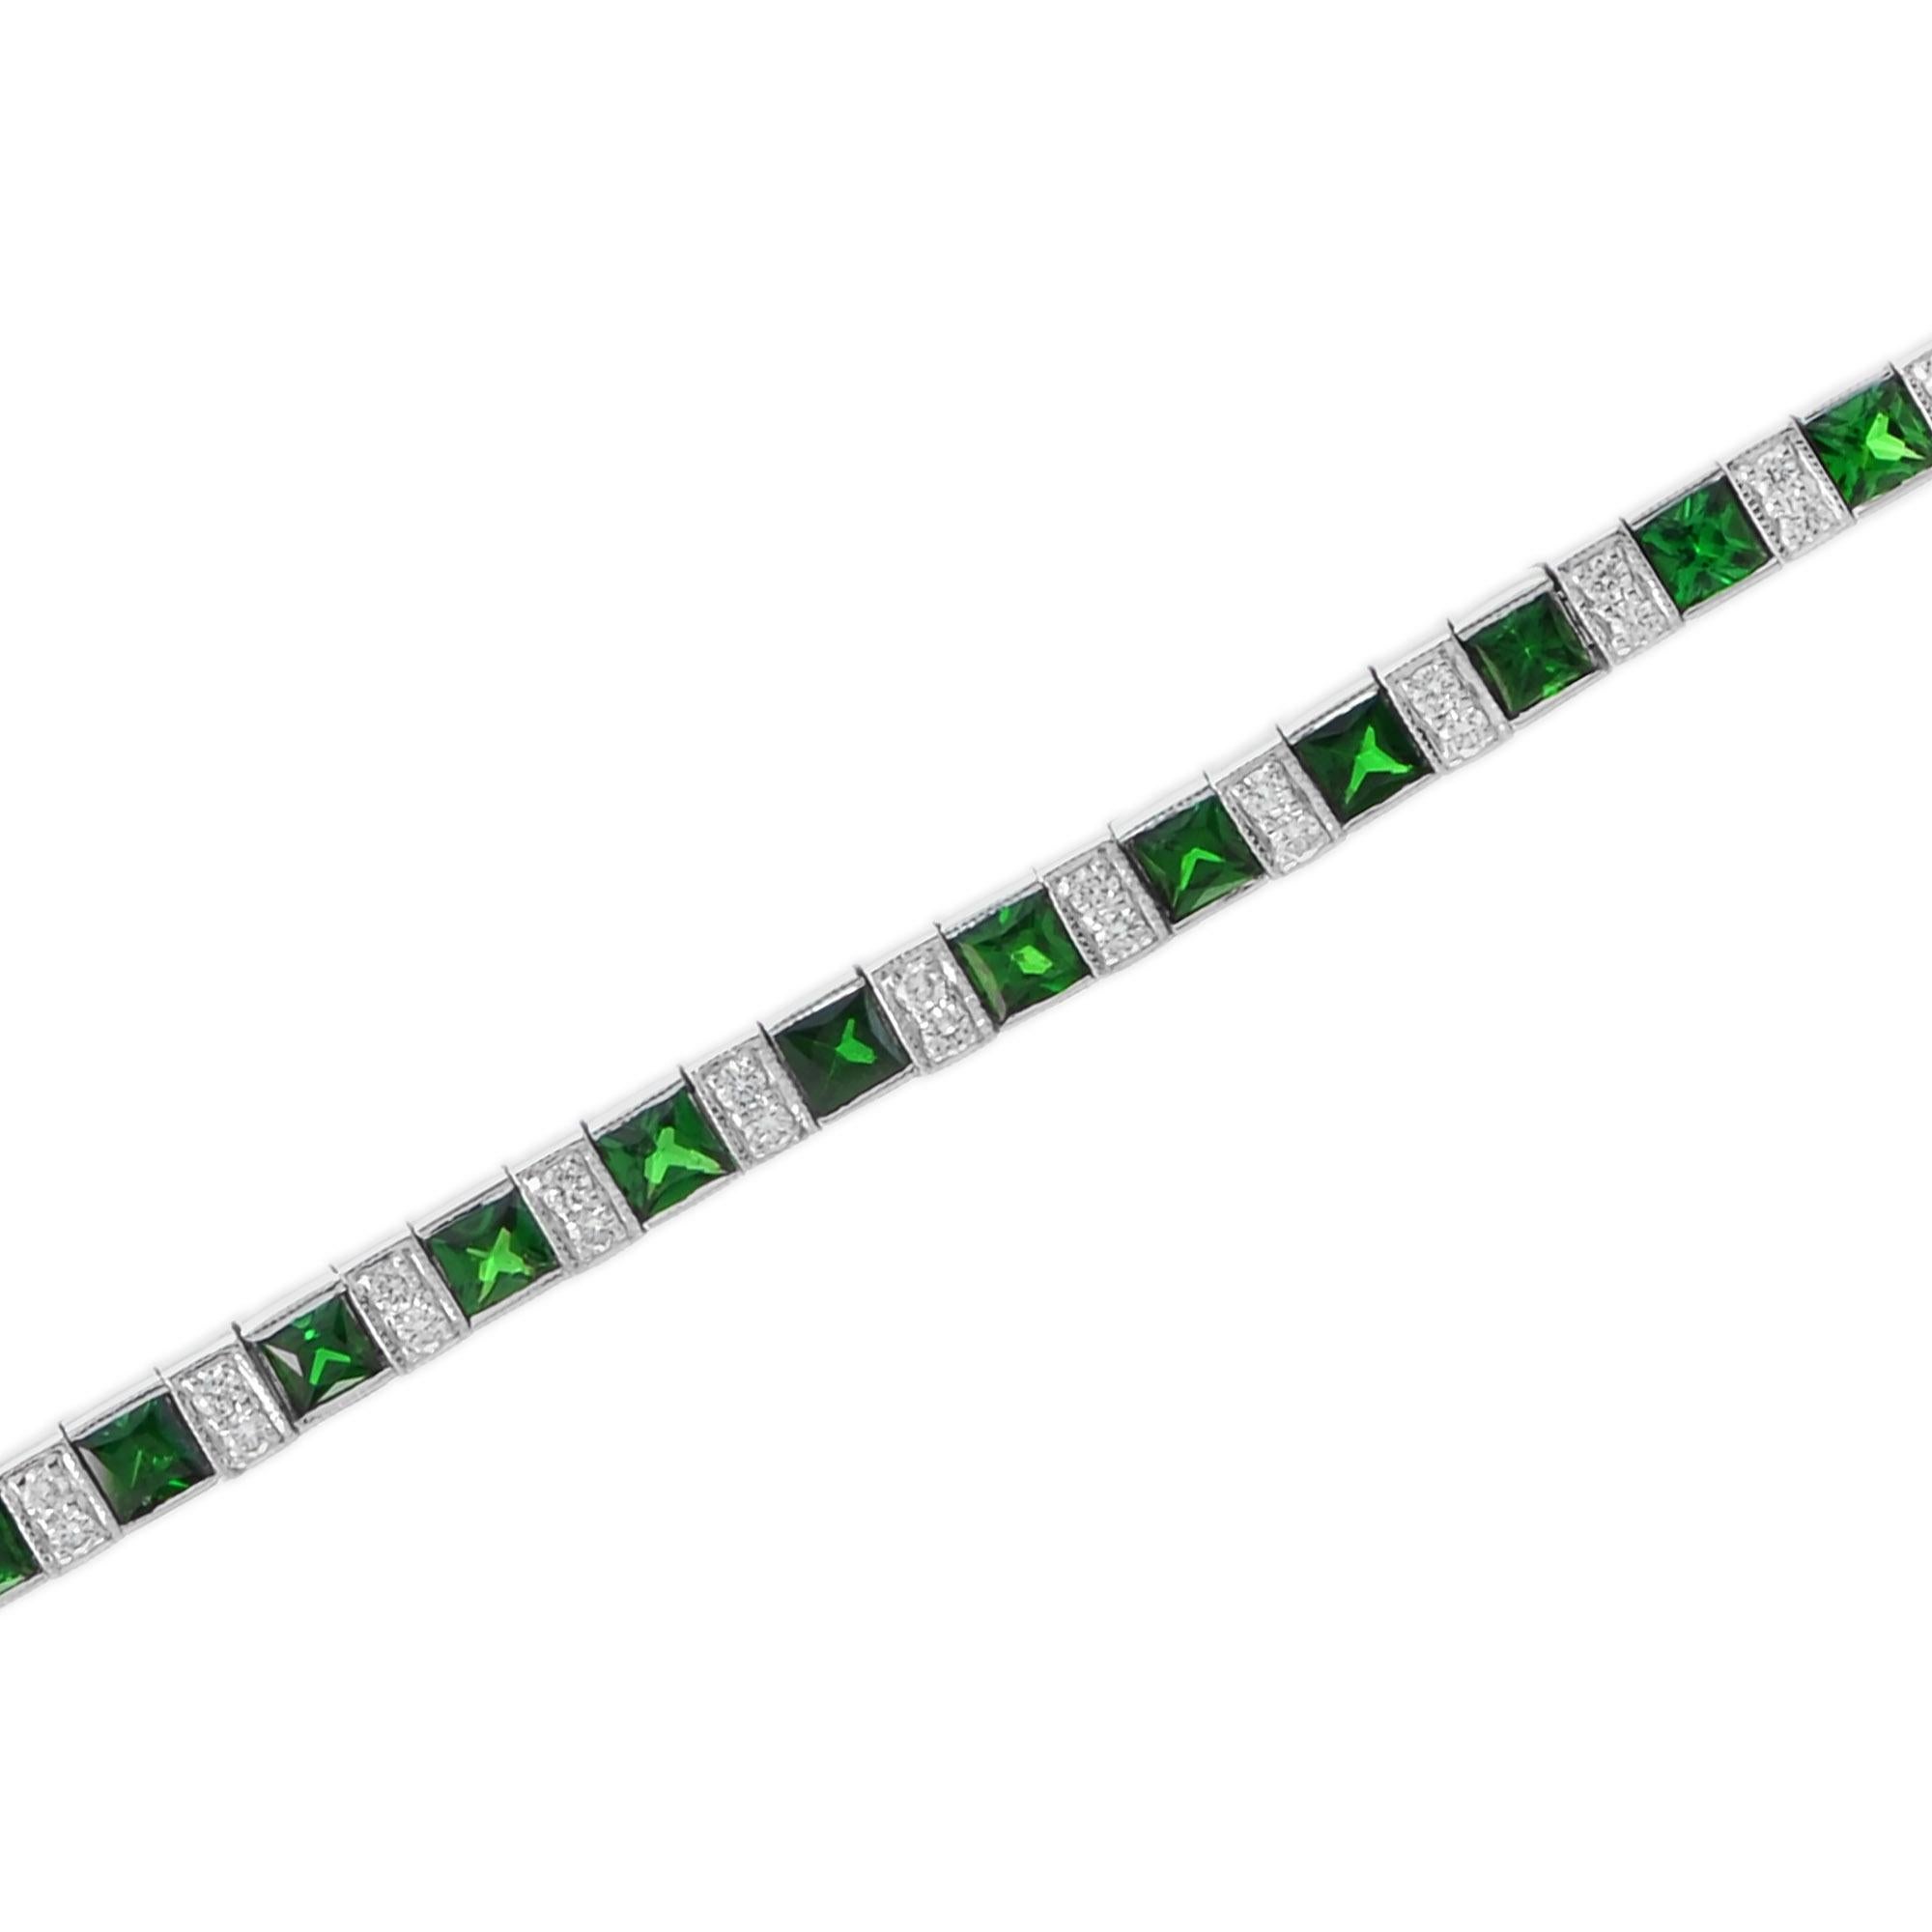 A timeless classic piece that every woman should own. This bracelet features round brilliant cut diamonds and princess cut tsavorite in 18k white gold. It is both classic and elegant tennis bracelet that perfect for all occasions.

Bracelet